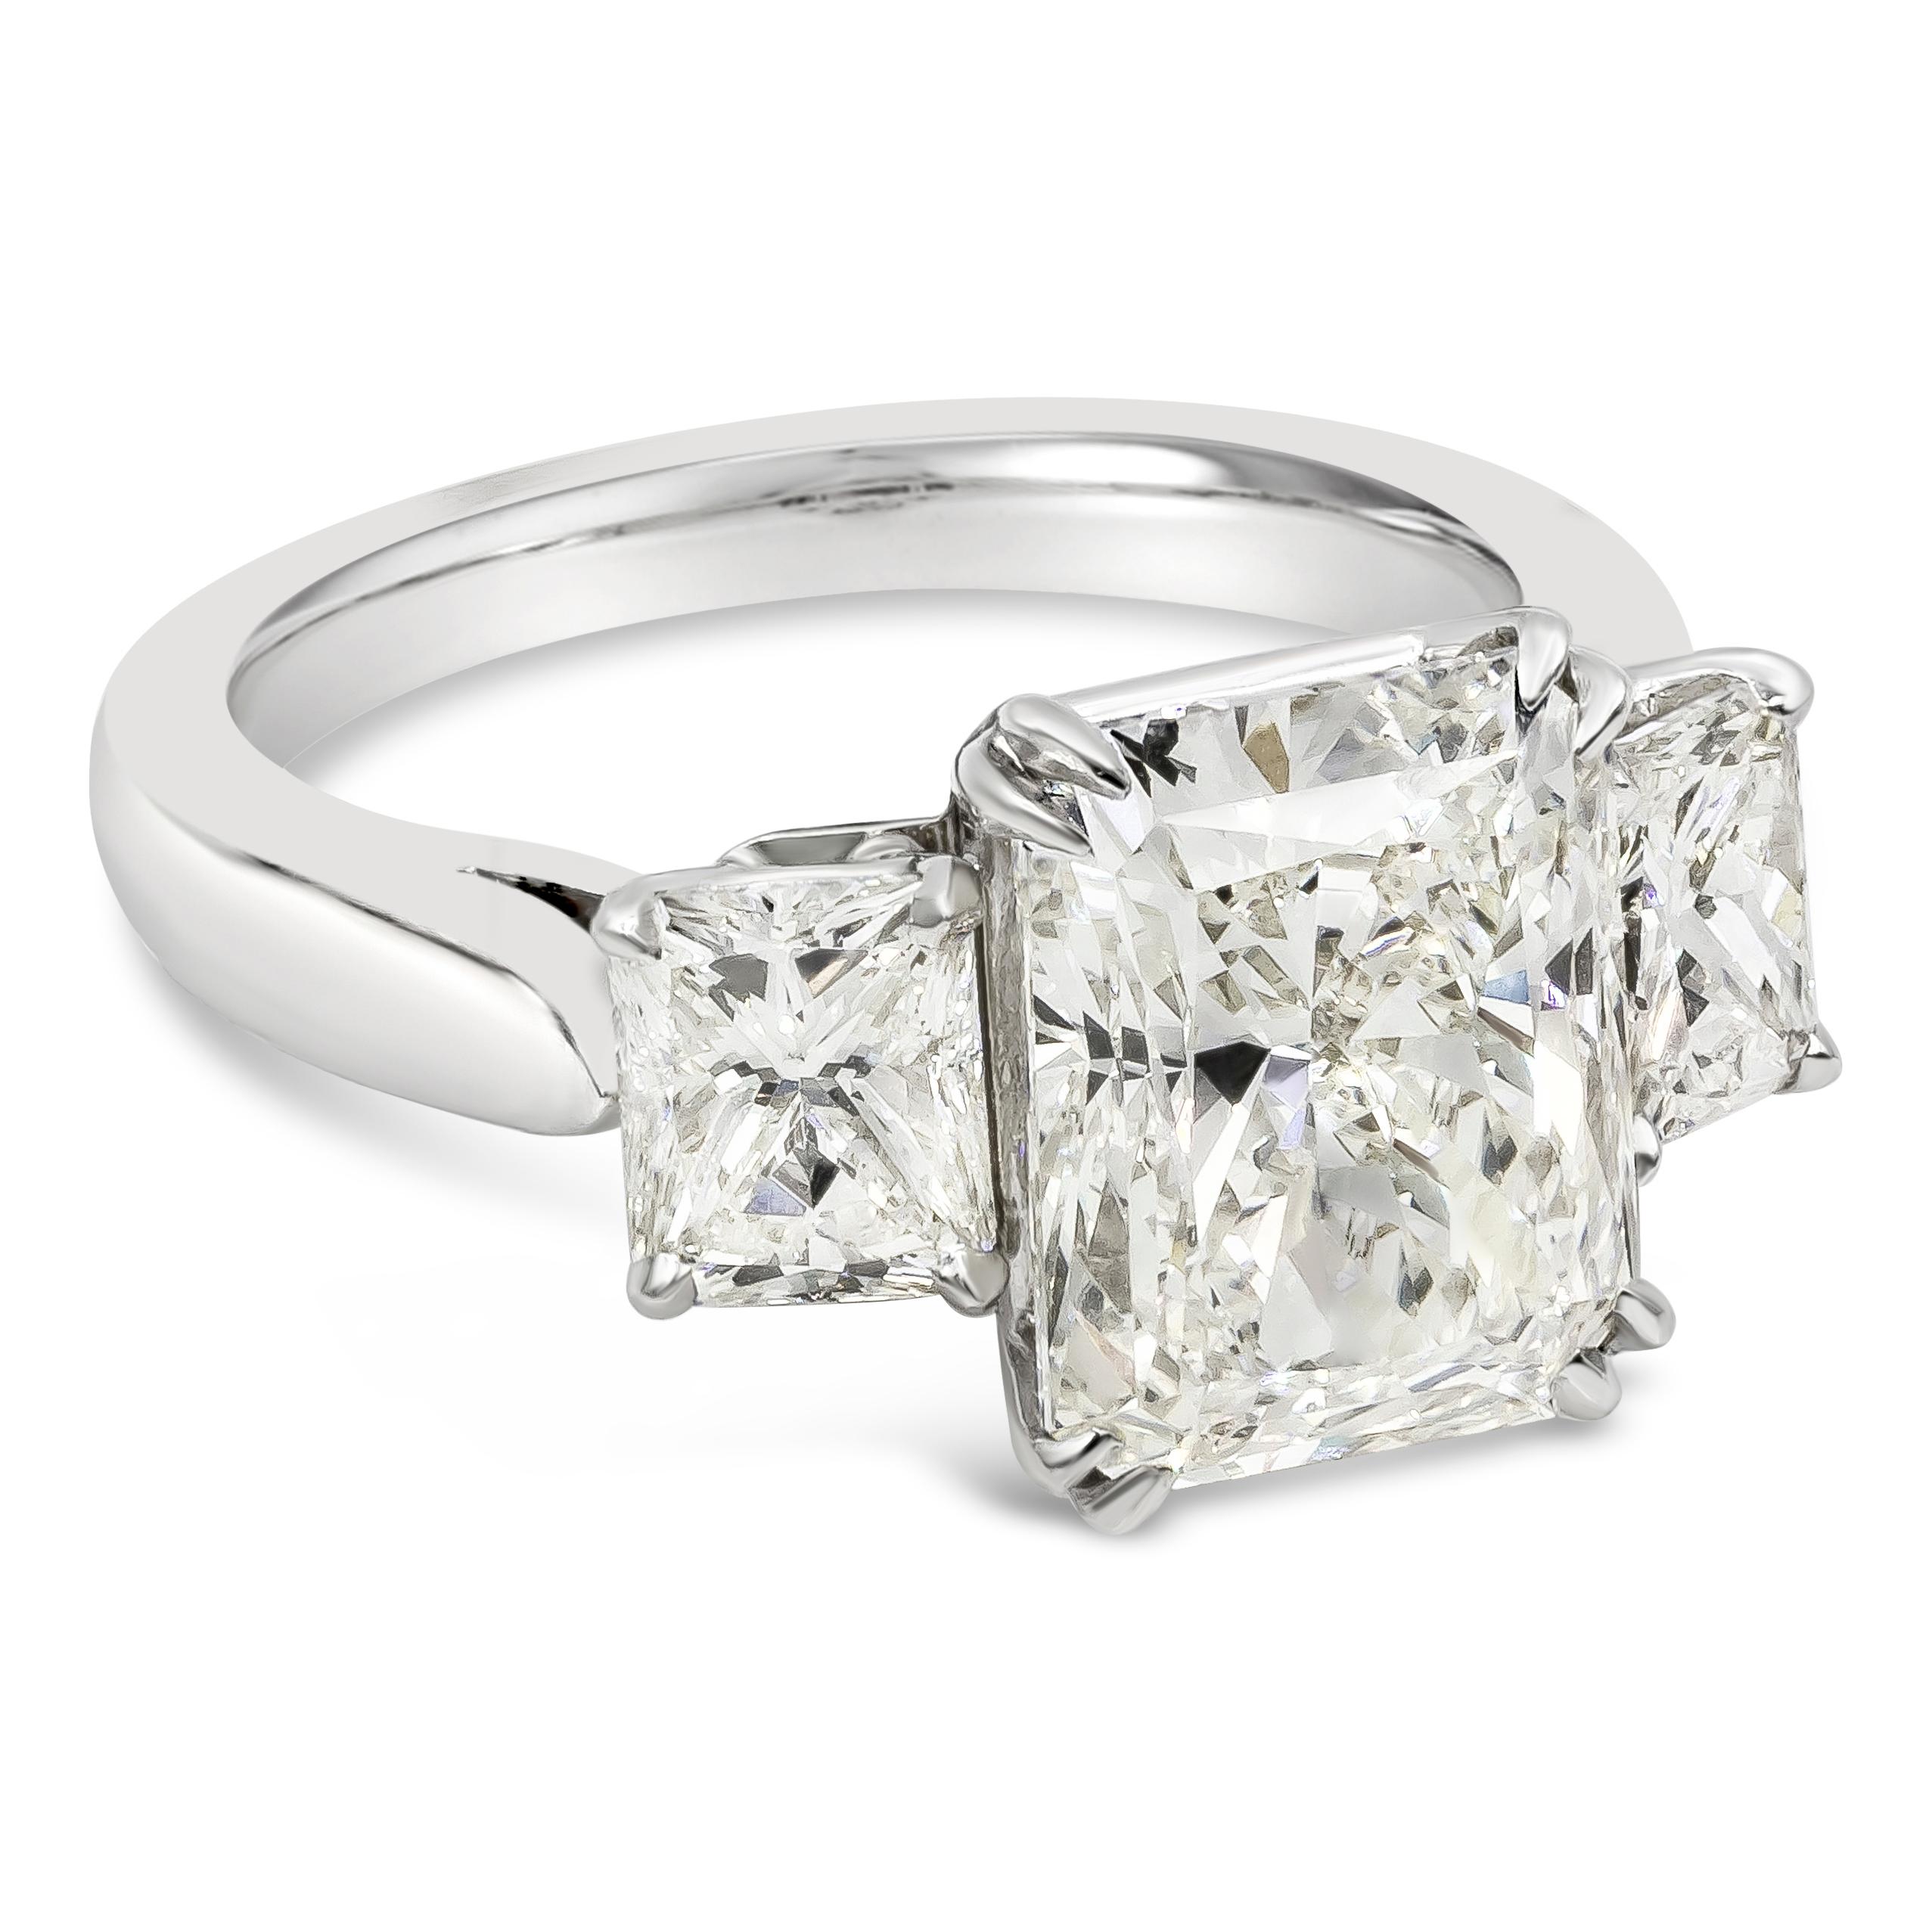 Brilliant and elegantly made three stone engagement ring showcasing a 5.39 carats radiant cut diamond certified by GIA as L color, VS2 in clarity and set in a timeless eight prong basket setting. Flanked by smaller radiant cut diamonds on each sides